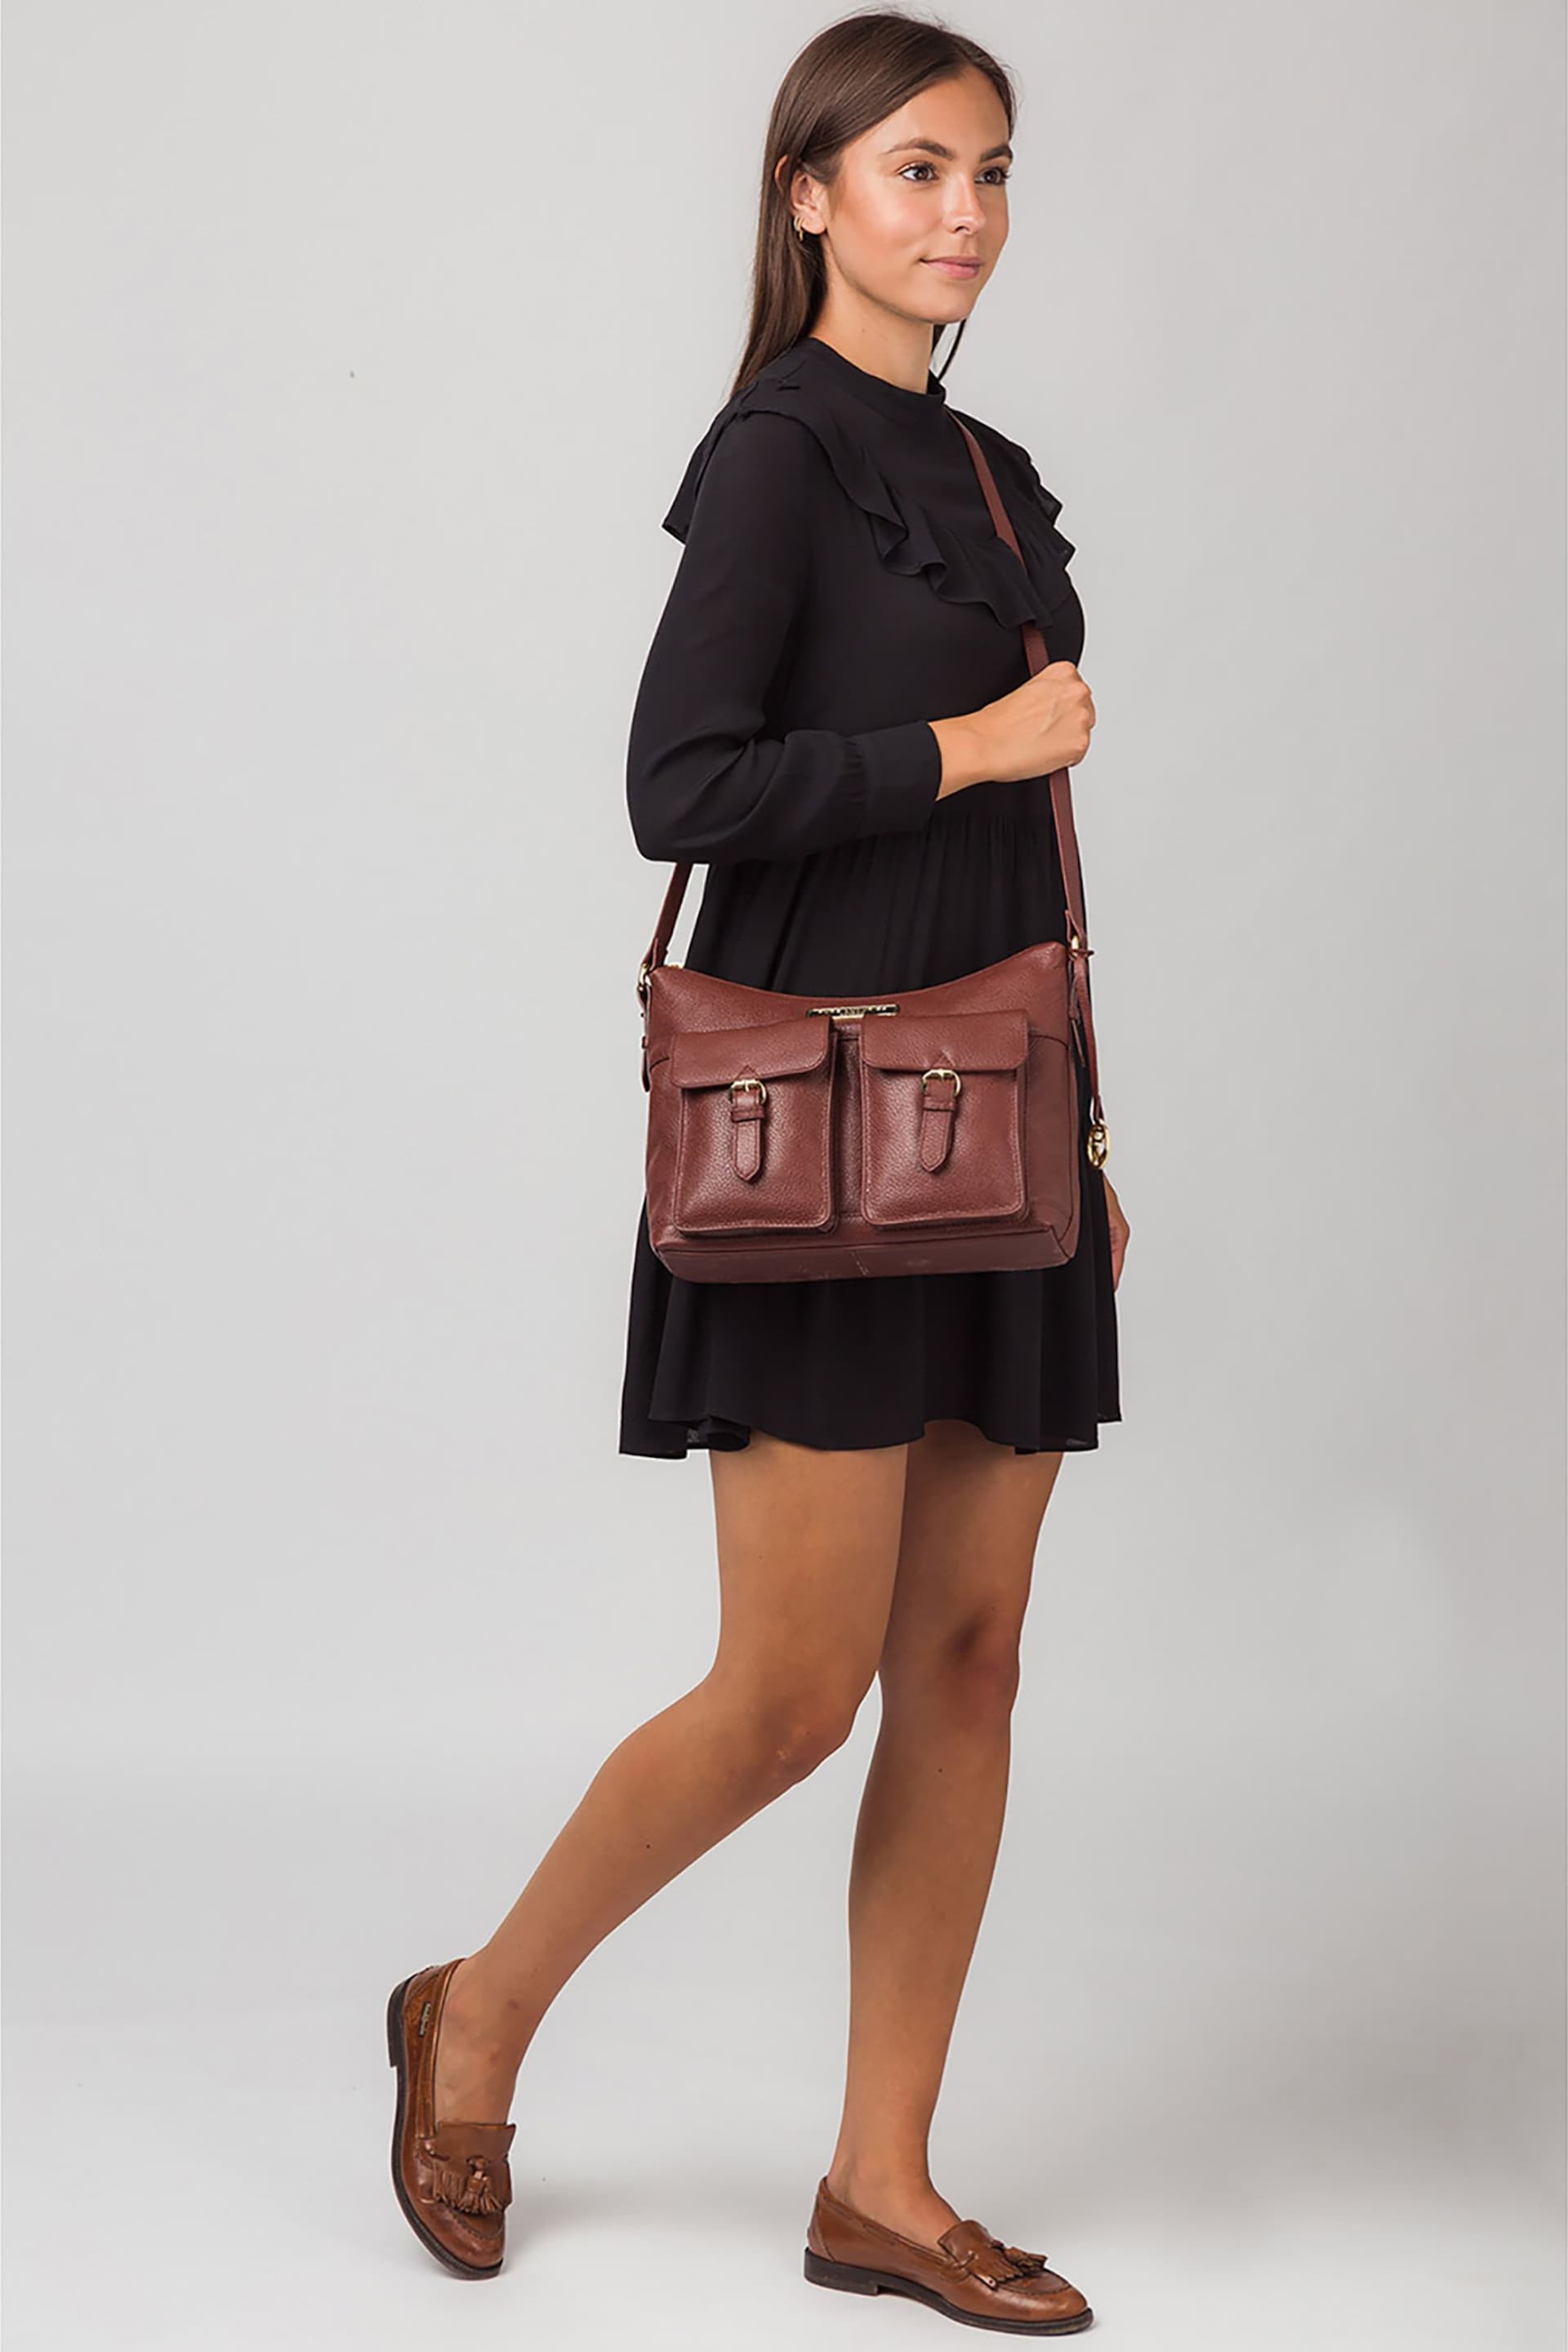 Pure Luxuries London Jenna Leather Shoulder Bag - Image 5 of 5